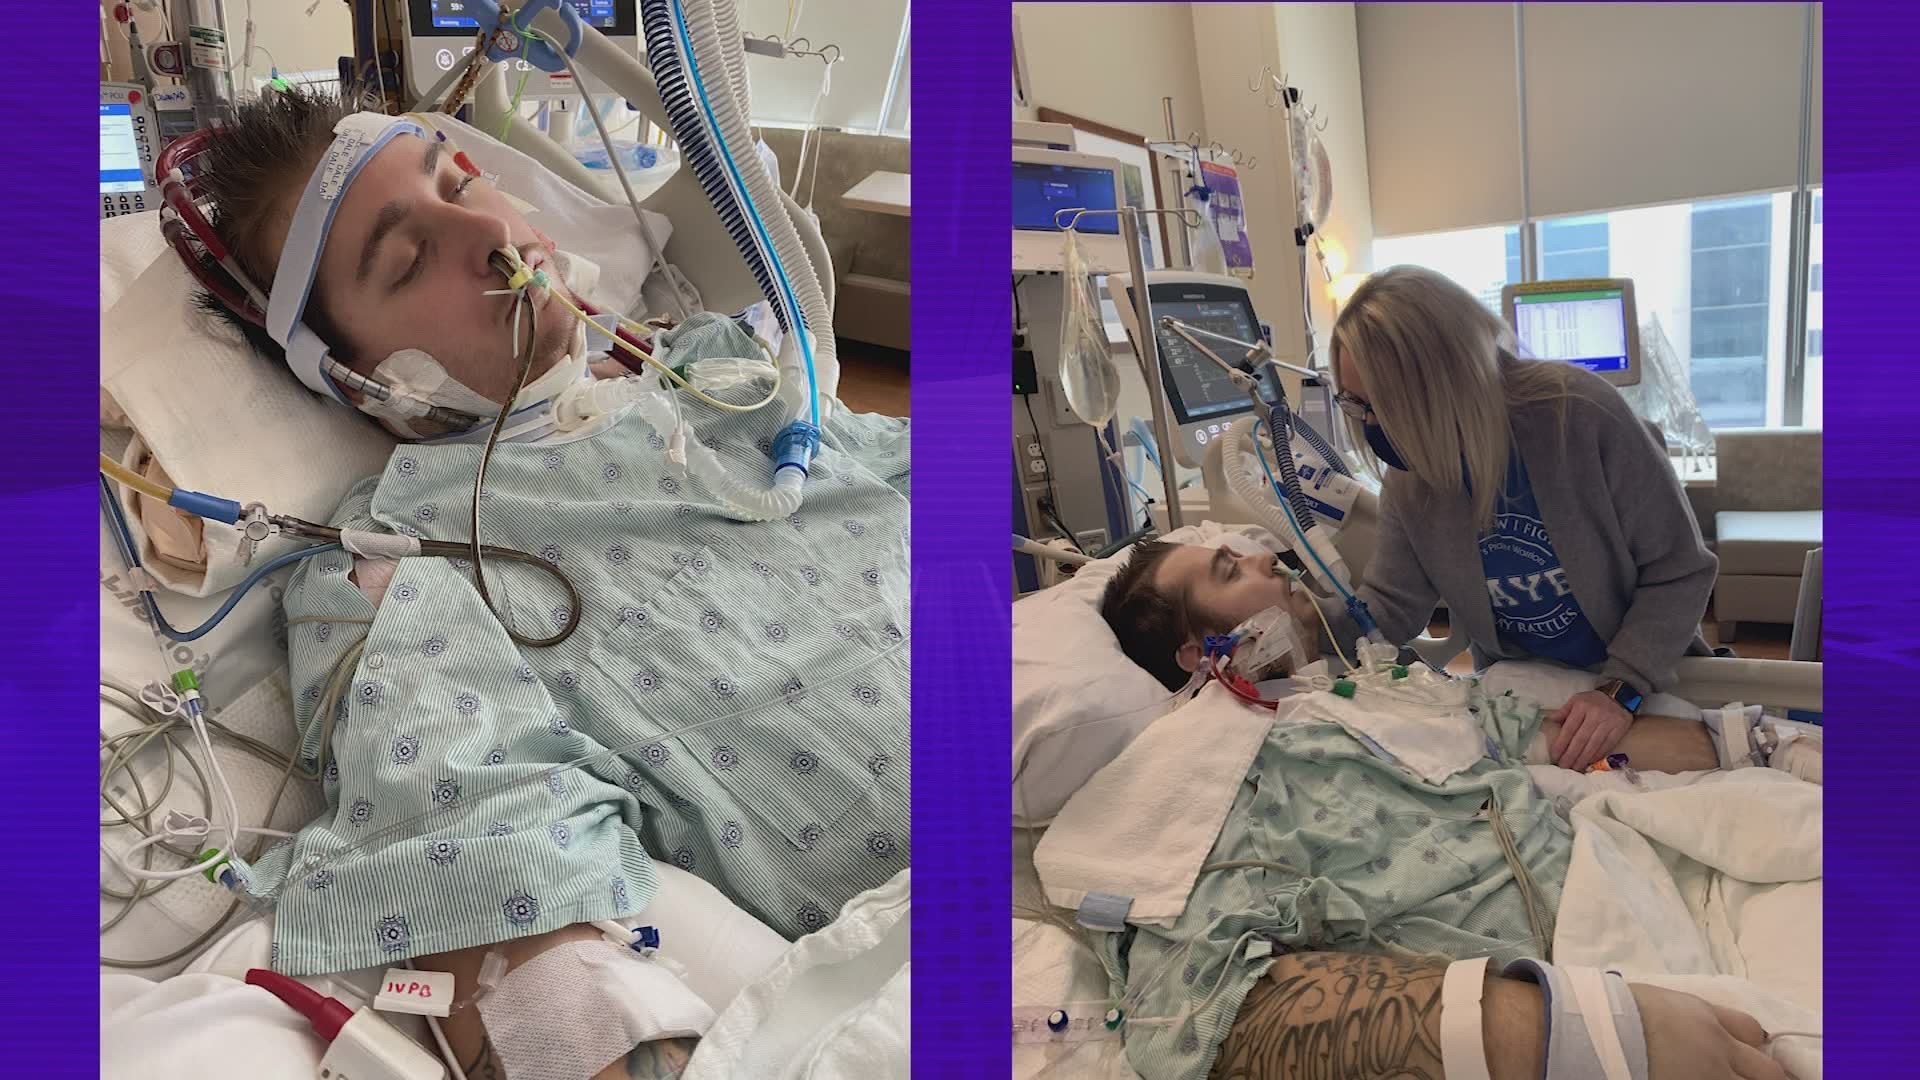 He was a COVID patient who fought for his life but now Colby Vondenstein is eating solid food and breathing on his own.